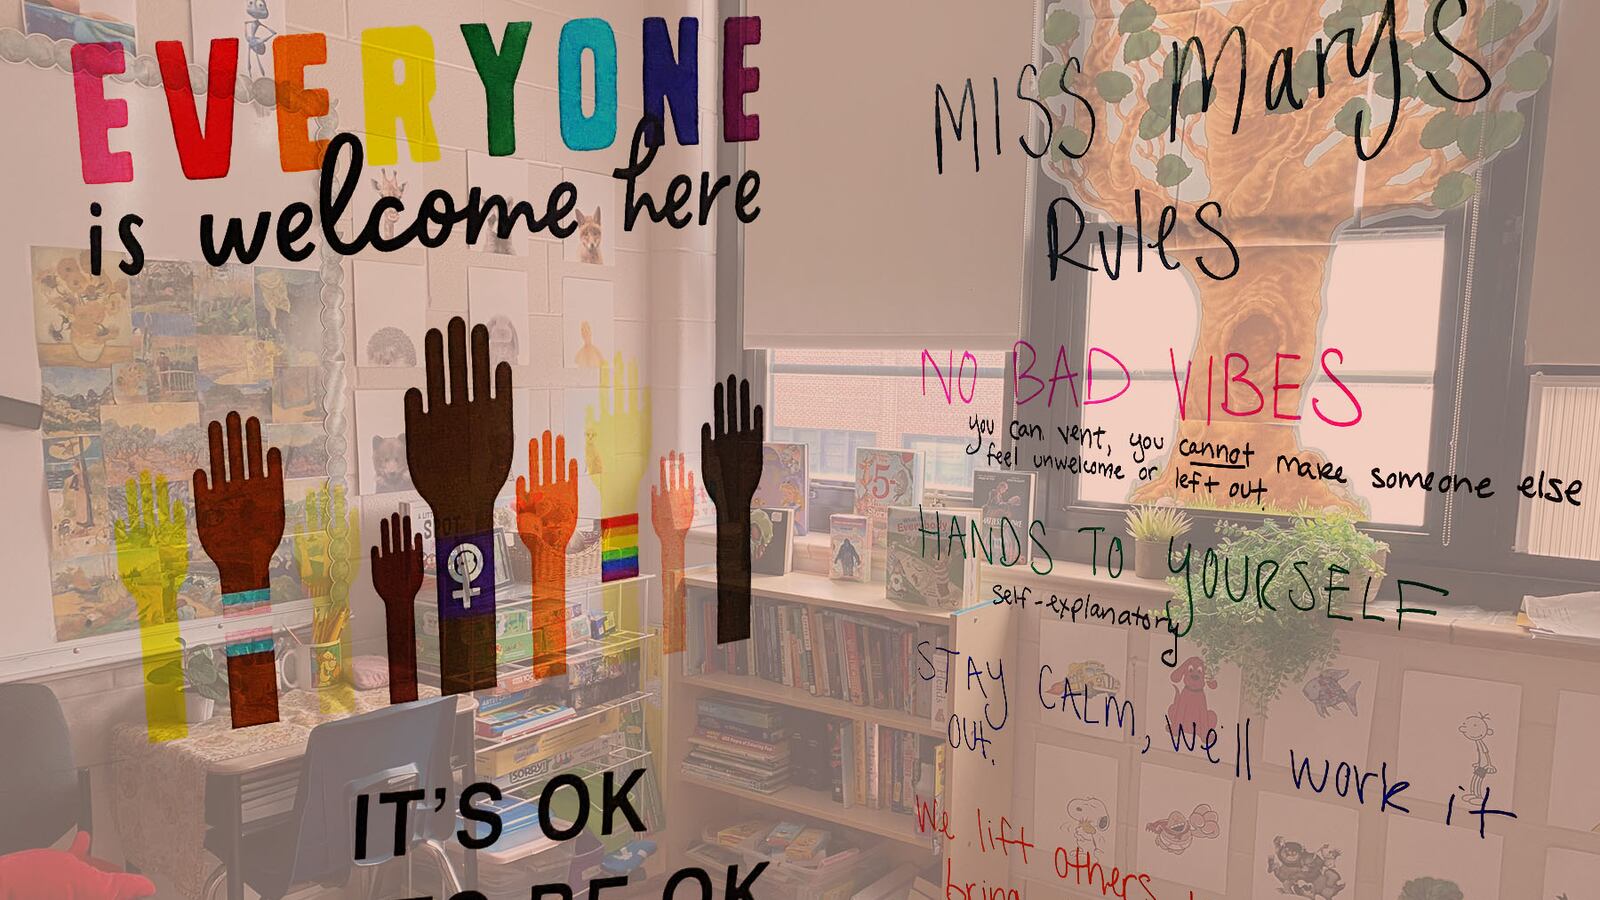 A social worker’s office with various signs that read “everyone is welcome here” and “it’s okay not to be ok” and “Miss Mary’s Rules: no bad vibes; hands to yourself; stay calm, we’ll work it out; we lift others up, we don’t bring them down.”